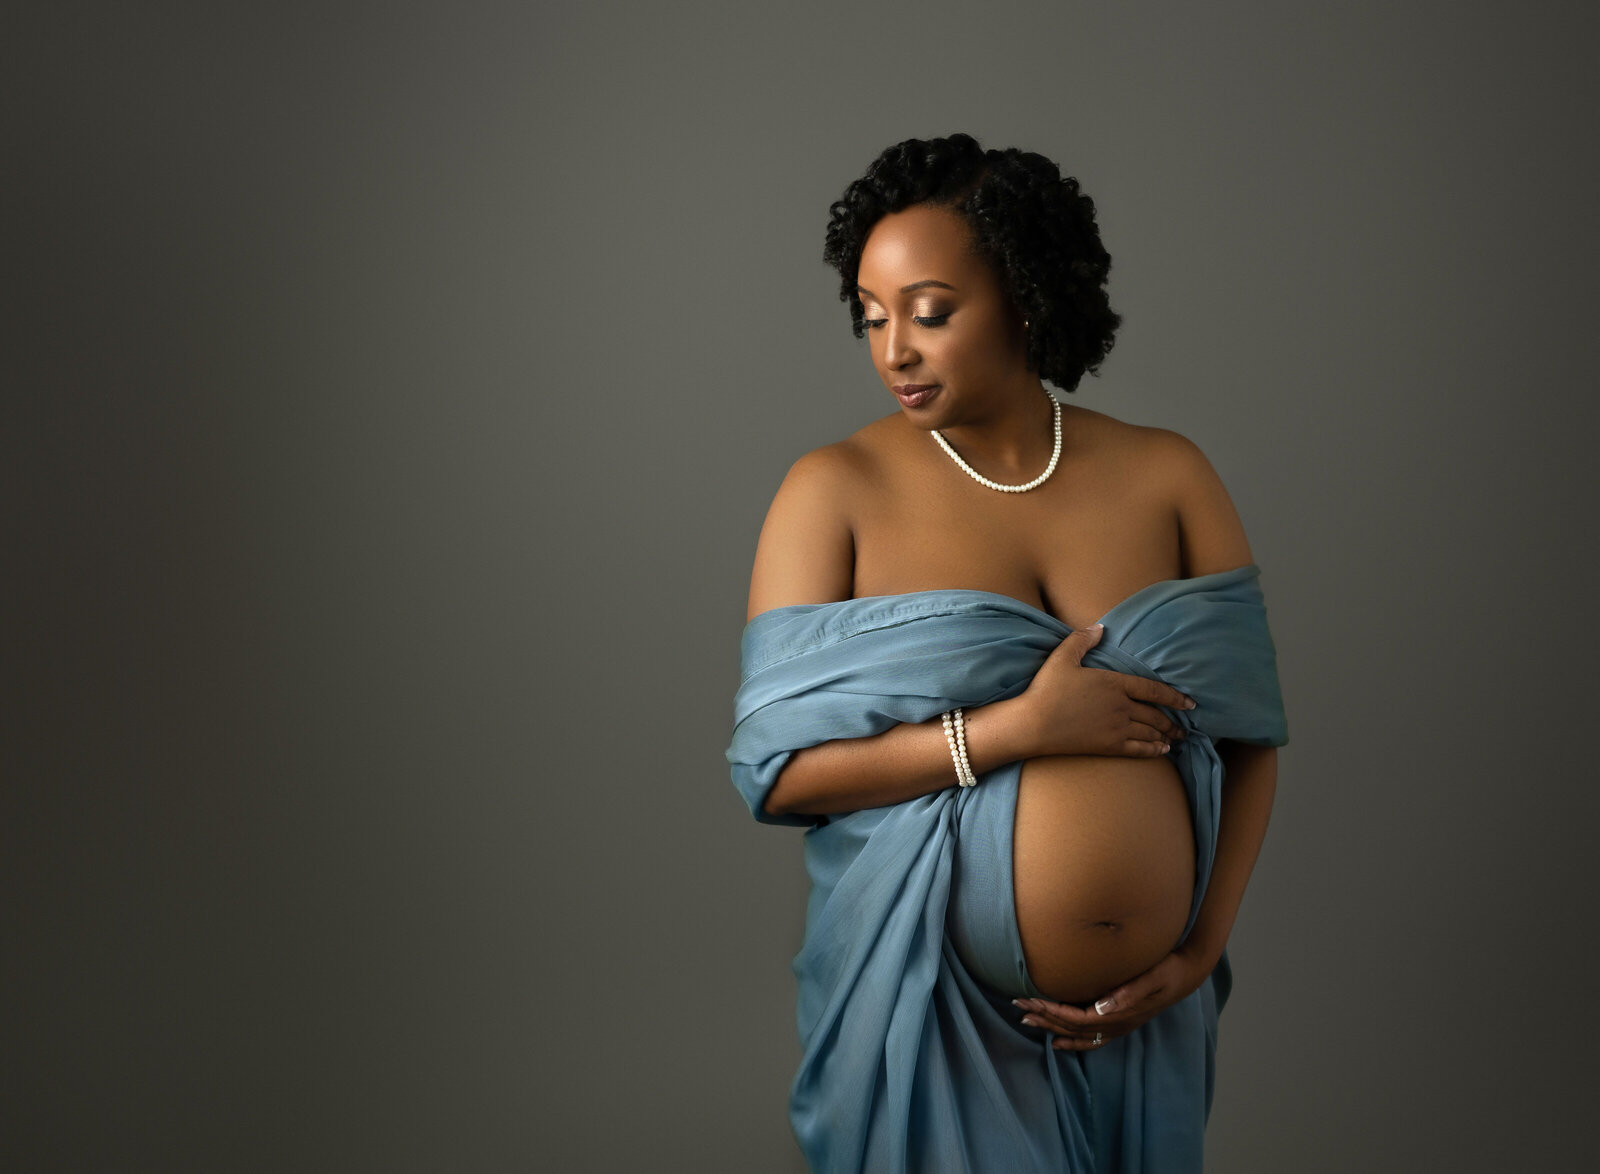 maternity photography packages near me